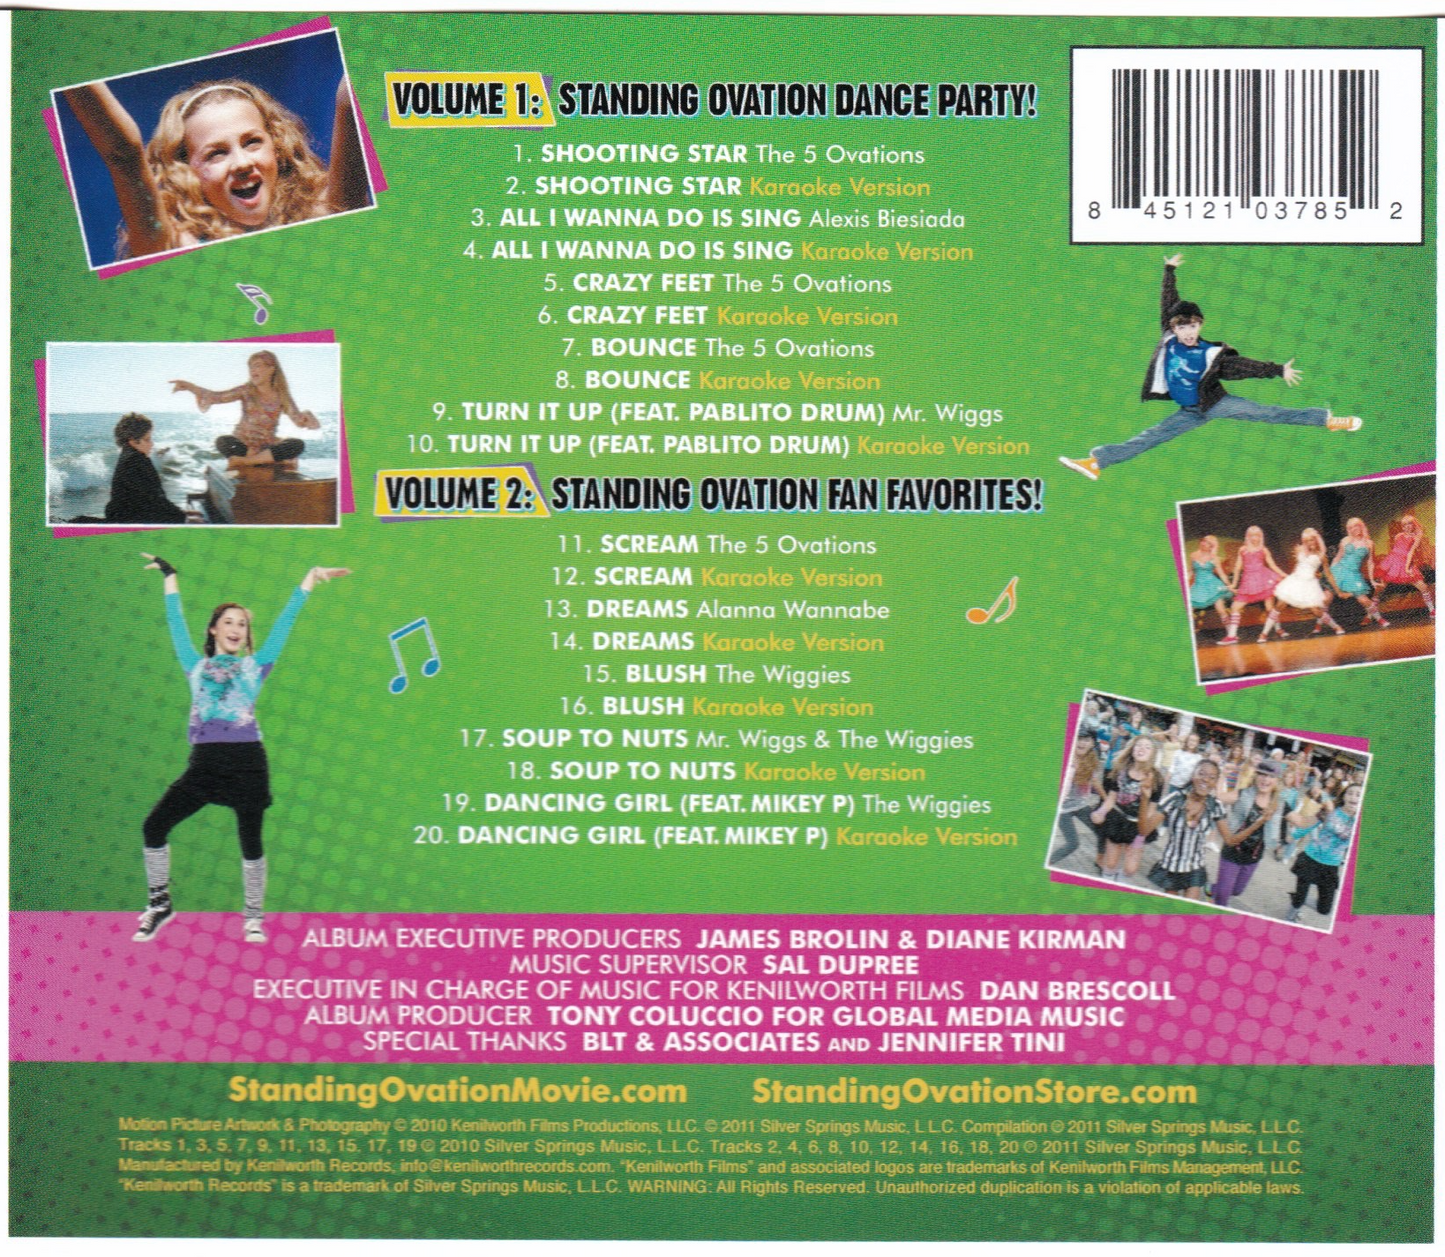 Standing Ovation - Music From The Motion Picture, Karaoke Edition Vols. 1 & 2 CD